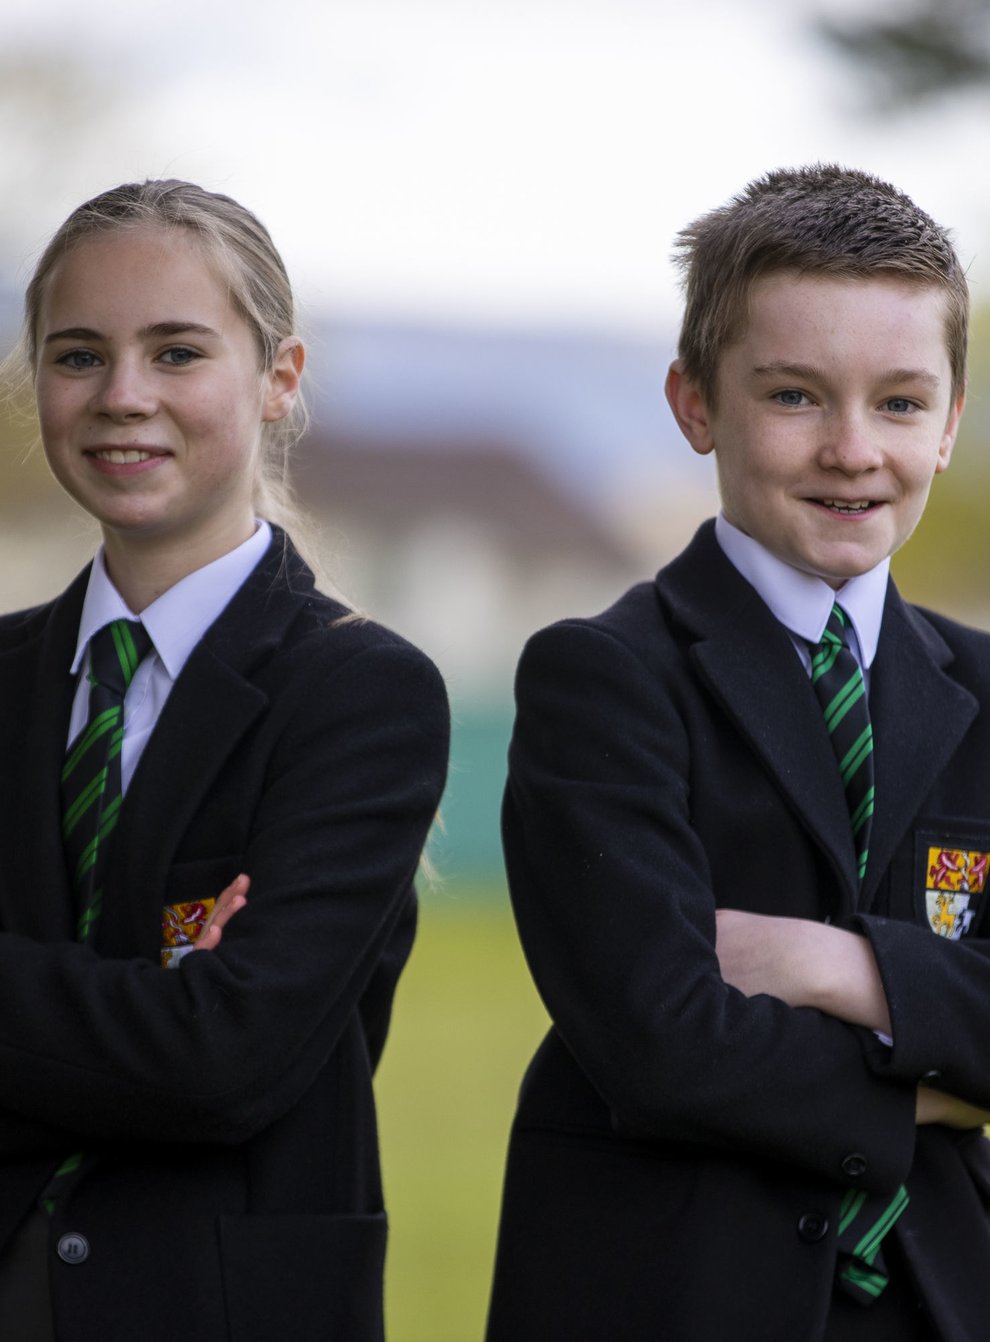 Year 8 pupils Effie Lappin (left) and Ben Borland of Sullivan Upper School in Holywood